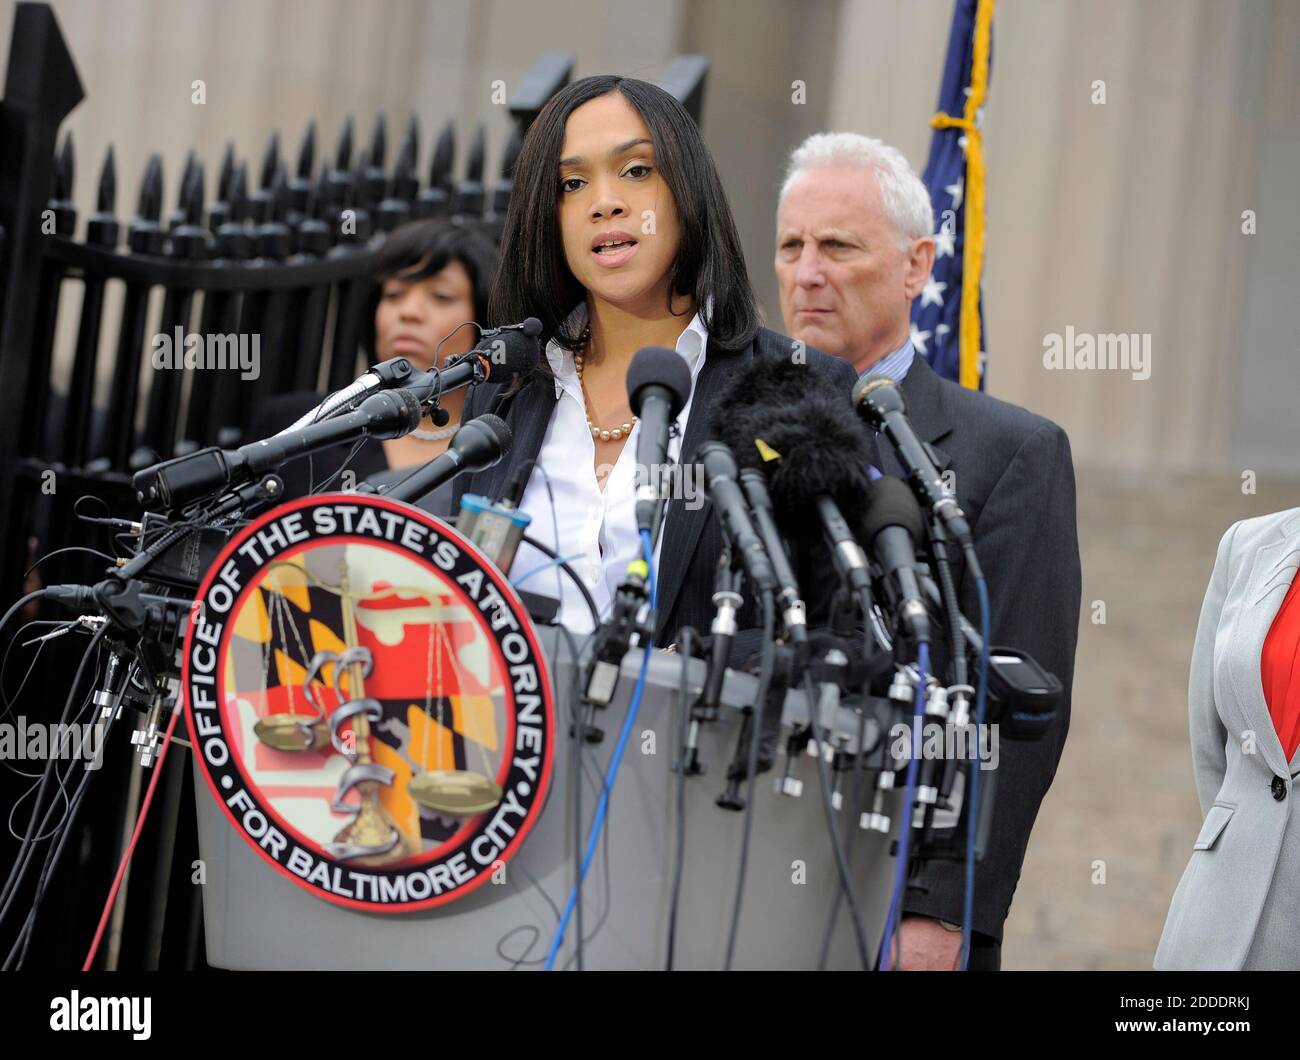 NO FILM, NO VIDEO, NO TV, NO DOCUMENTARY - Baltimore State Attorney Marilyn Mosby answers questions at a press conference outside the War Memorial Building on May 1, 2015, talking about the arrests of police officers involved in the death of Freddie Gray in Baltimore, MD, USA. Photo by Lloyd Fox/Baltimore Sun/TNS/ABACAPRESS.COM Stock Photo